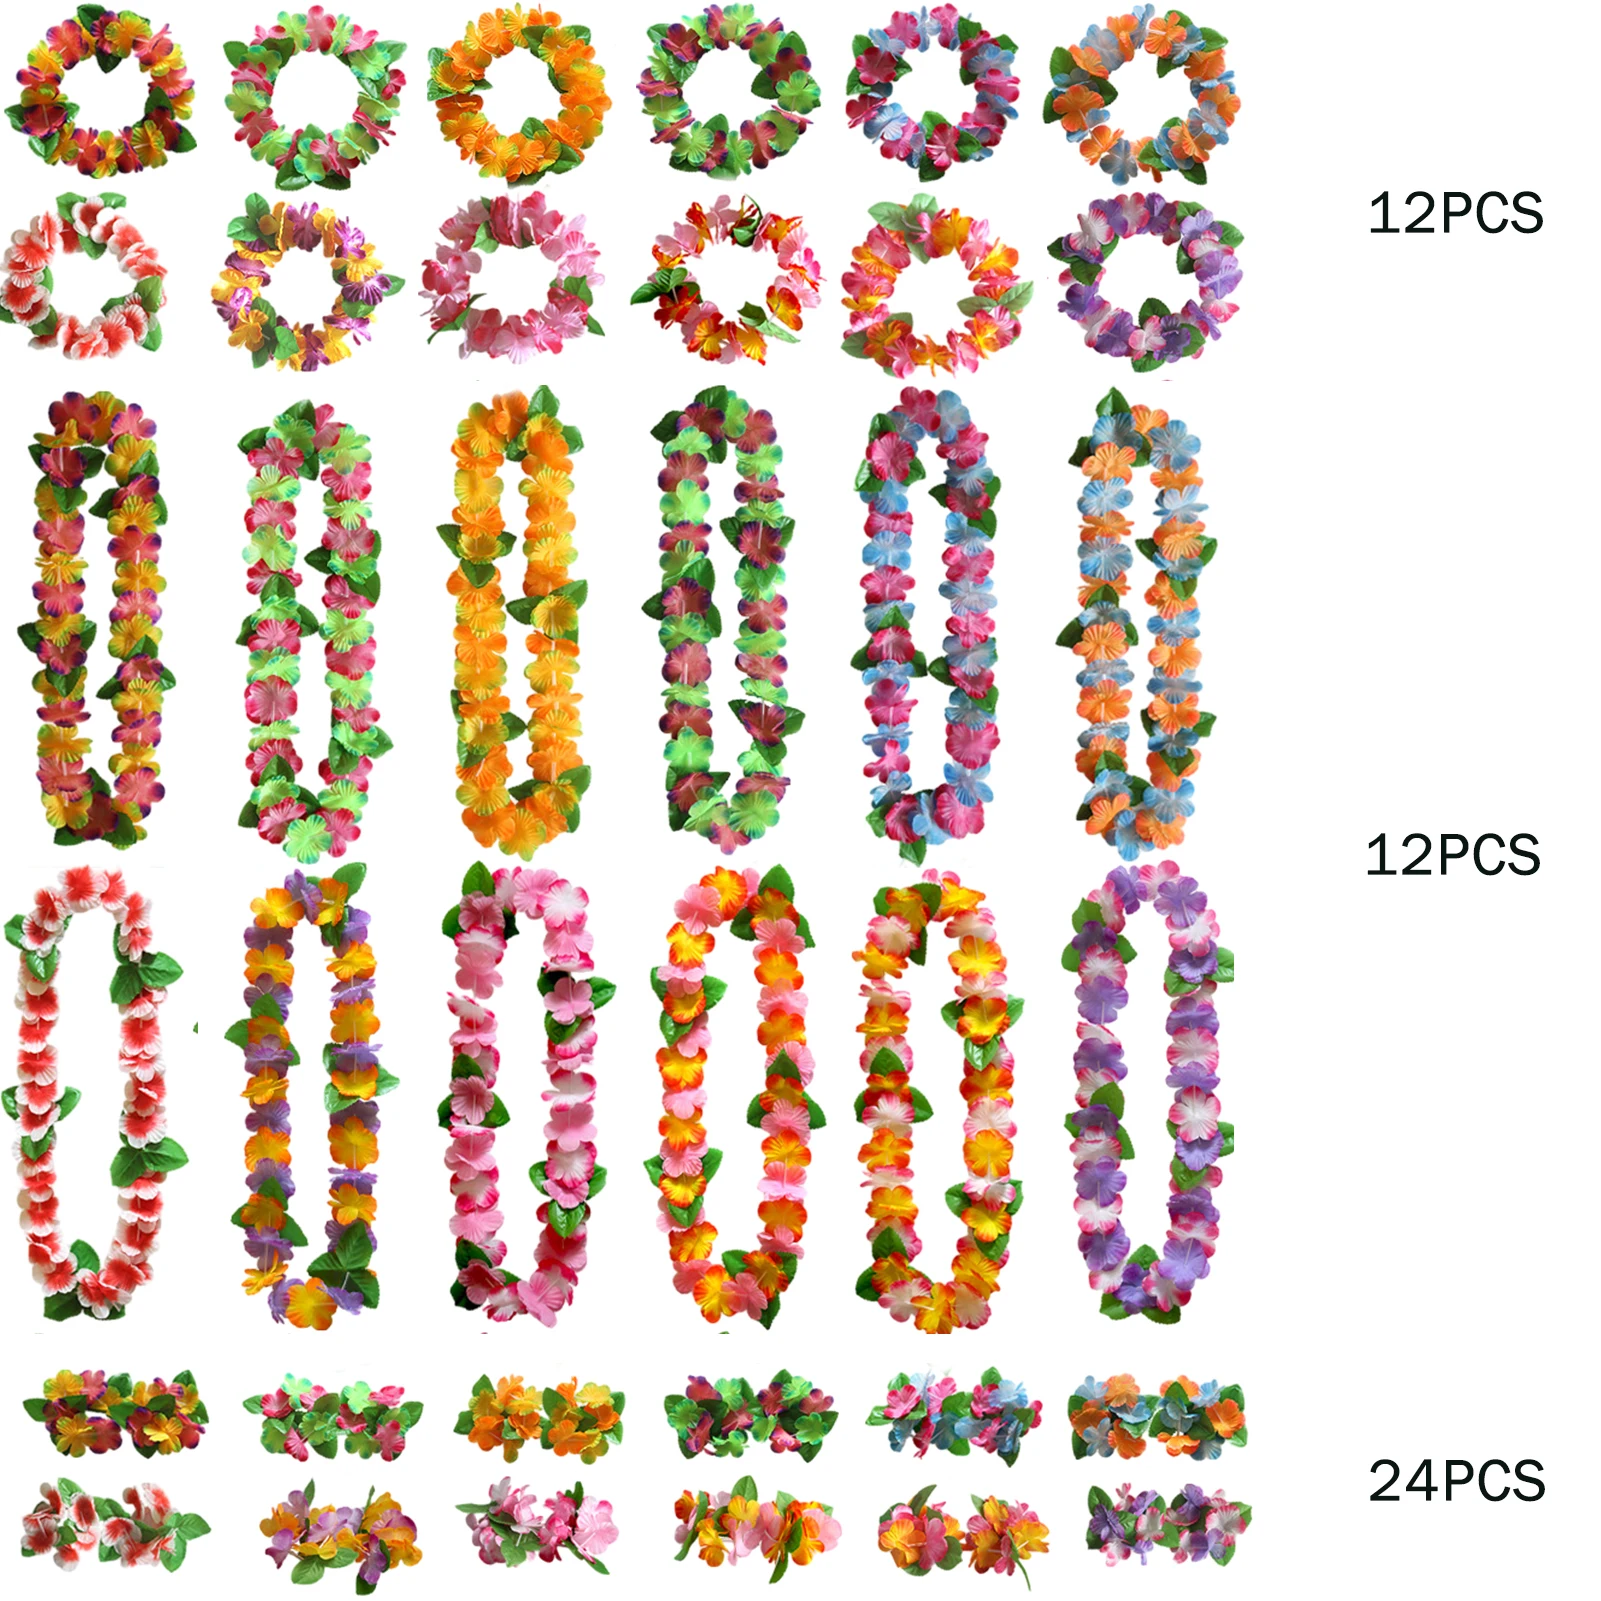 

48pcs Party Decorations Wreath Pendant Outfit Headband Beach Hawaiian Lei Holiday Tropical Garland Necklace Chains Bracelets